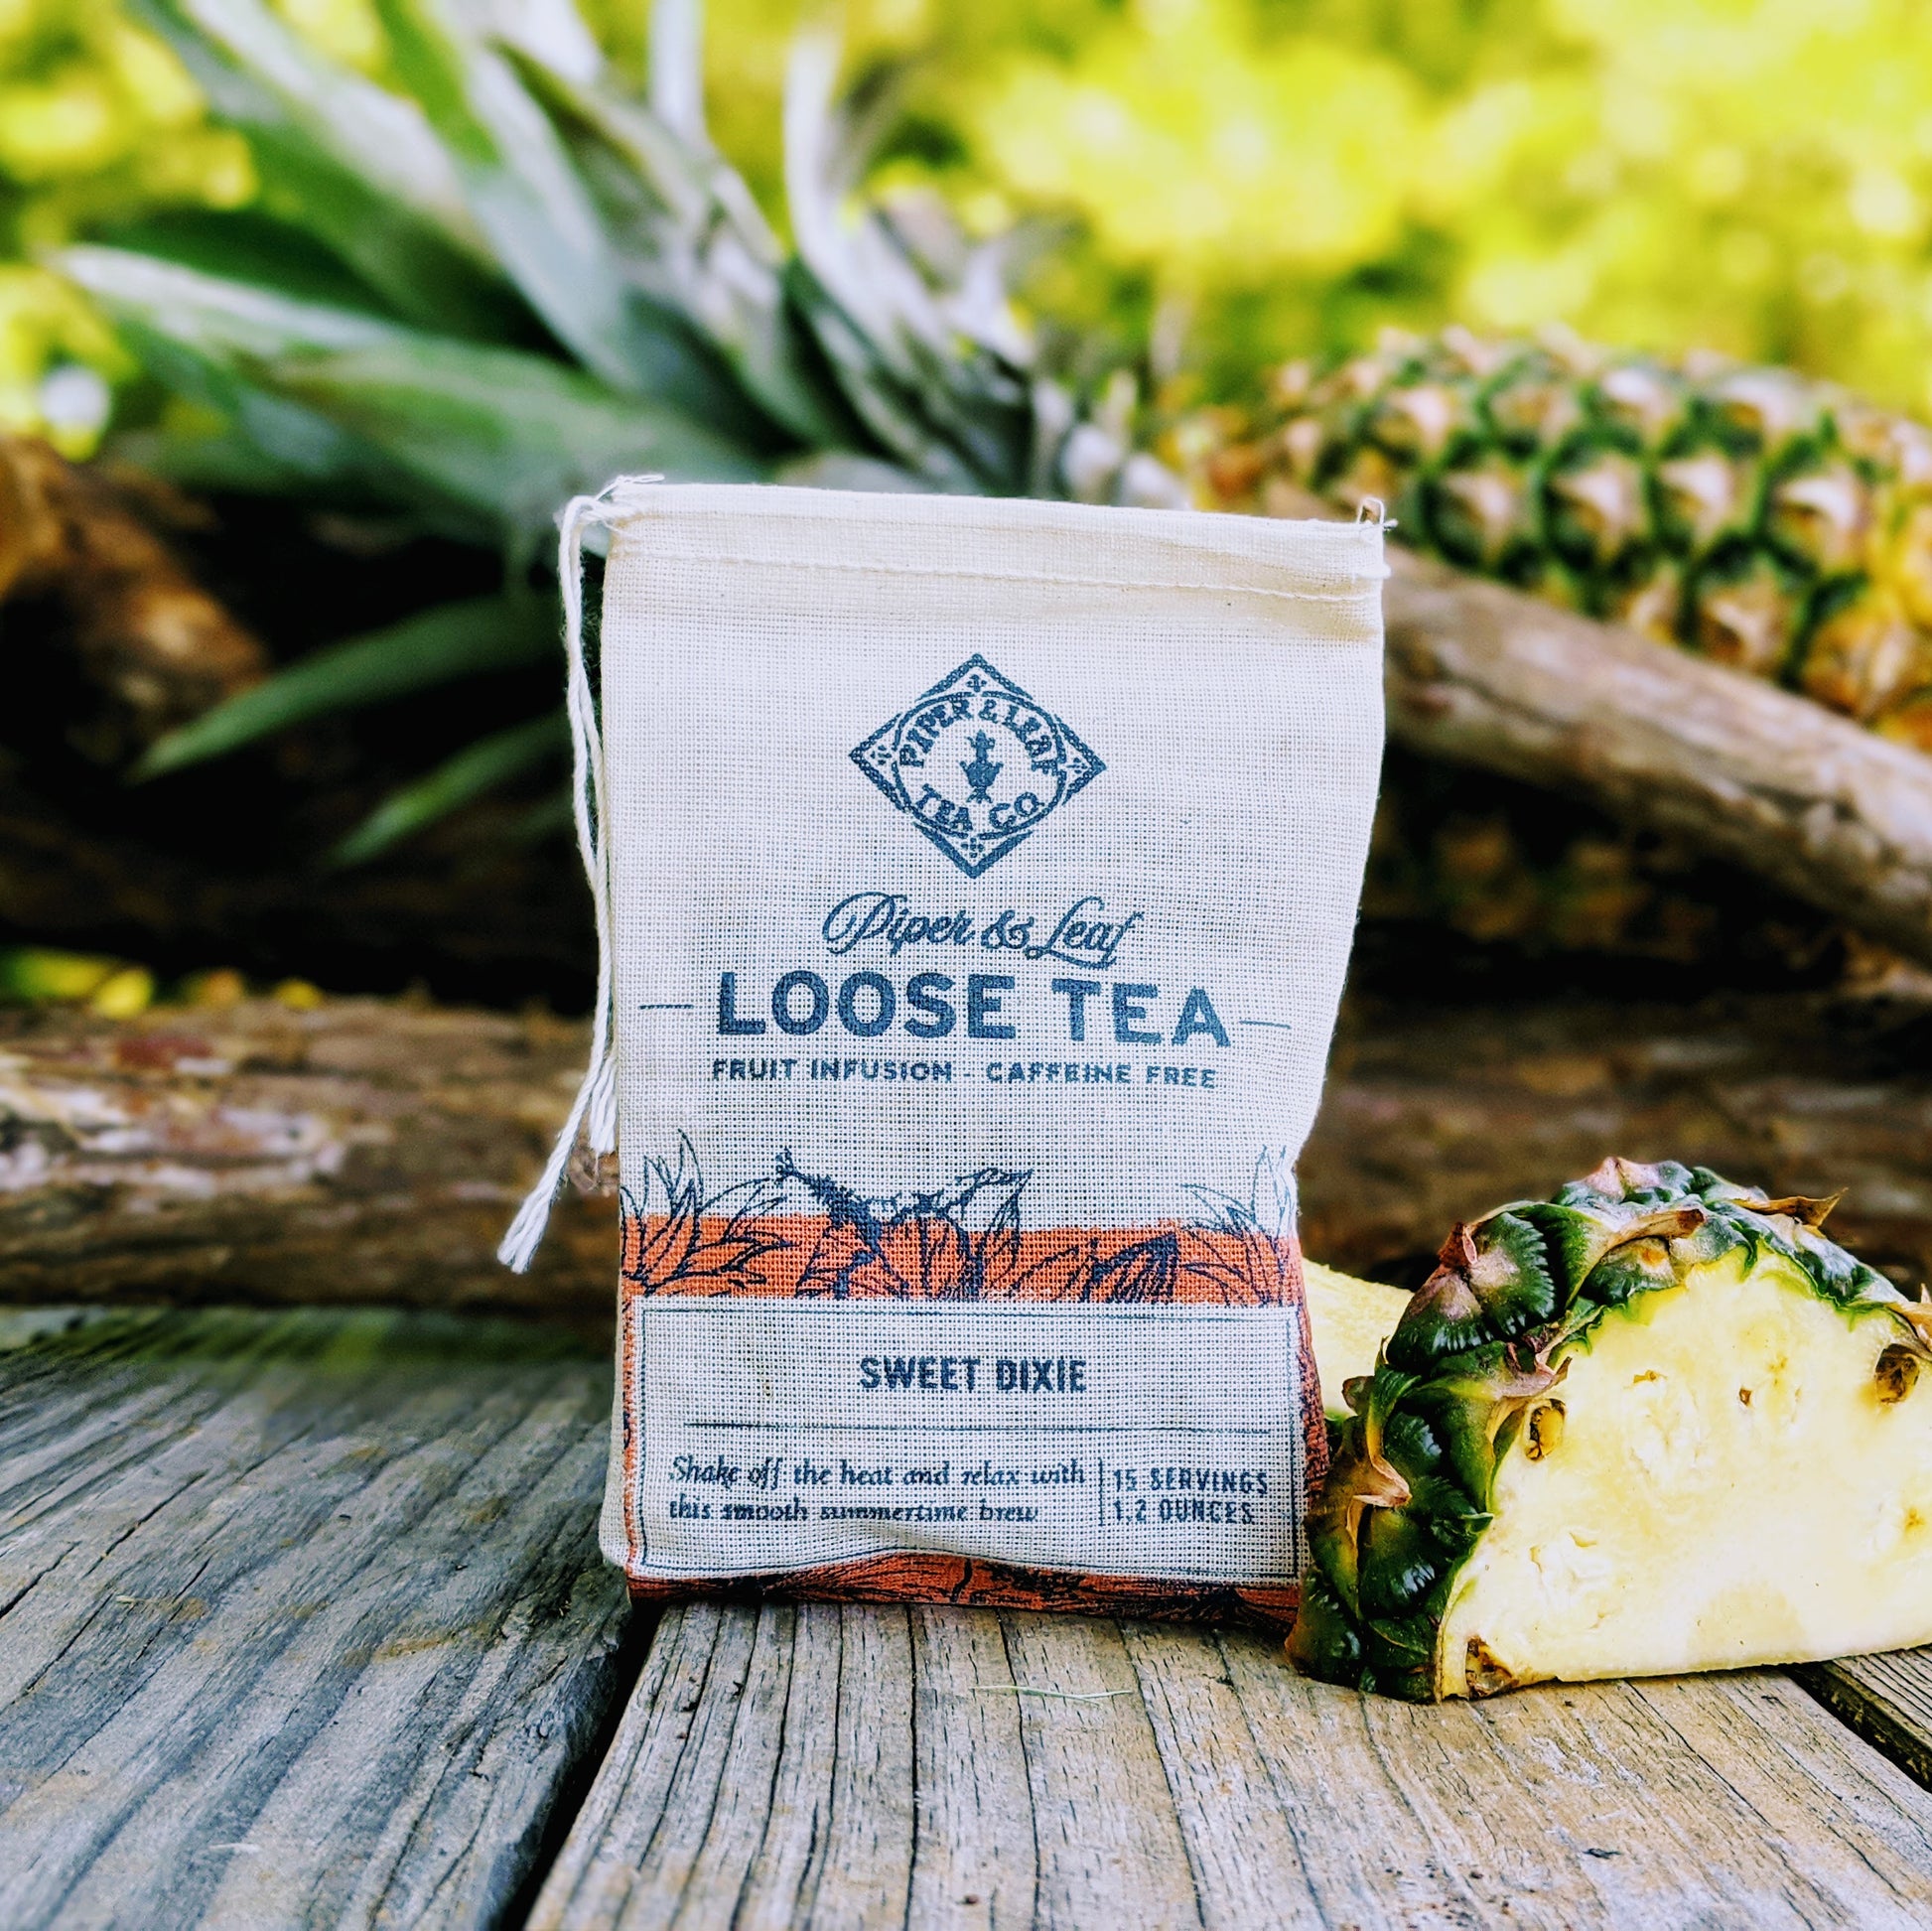 A packet of Sweet Dixie Muslin Bag of loose leaf fruit blend tea from Piper & Leaf Tea Co., labeled caffeine-free, displayed next to a fresh pineapple slice on a wooden surface.